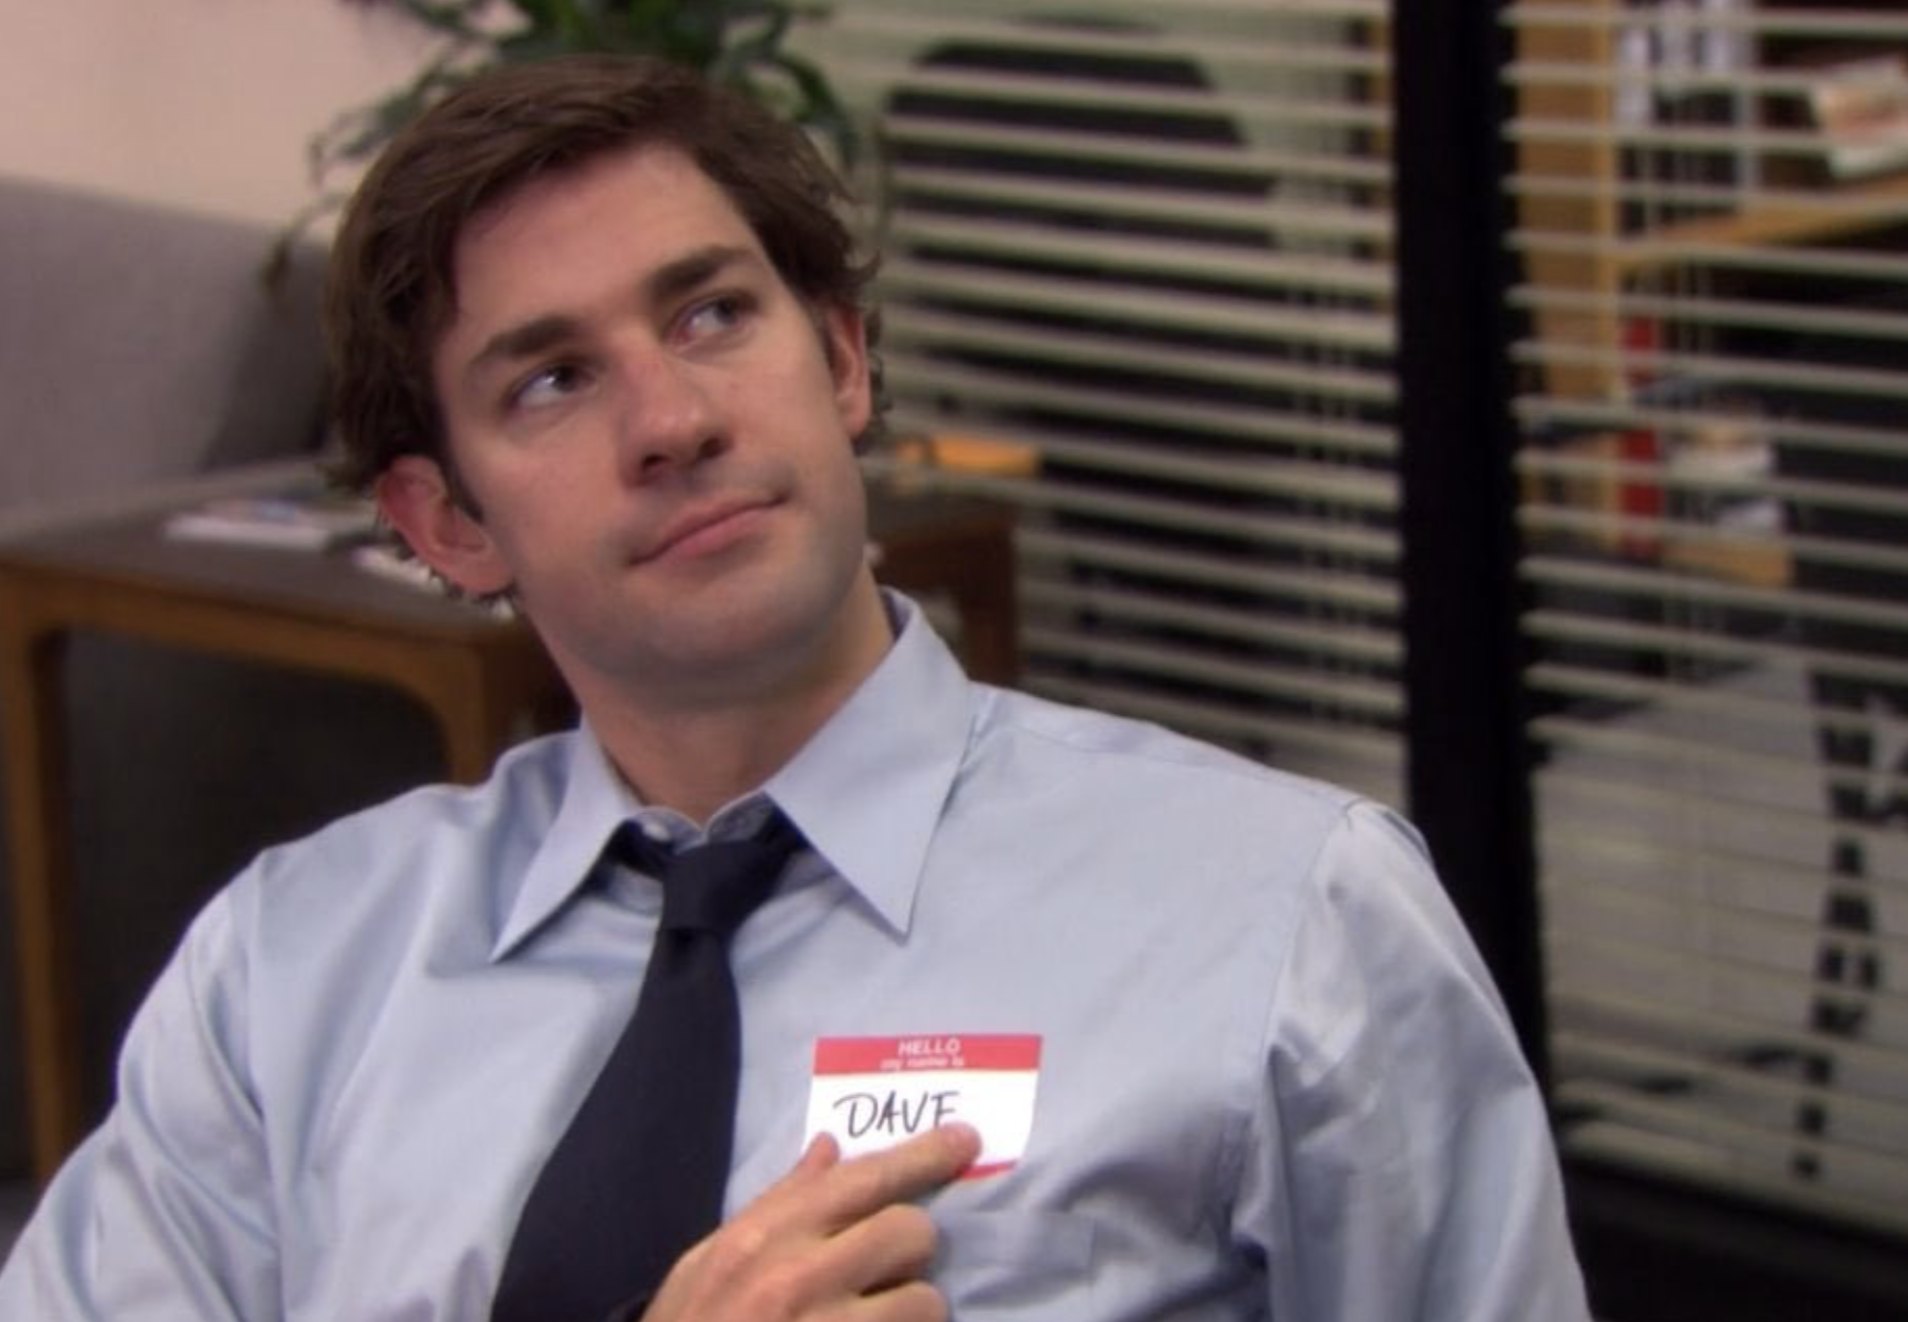 Jim wears a name tag on his shirt reading: Dave